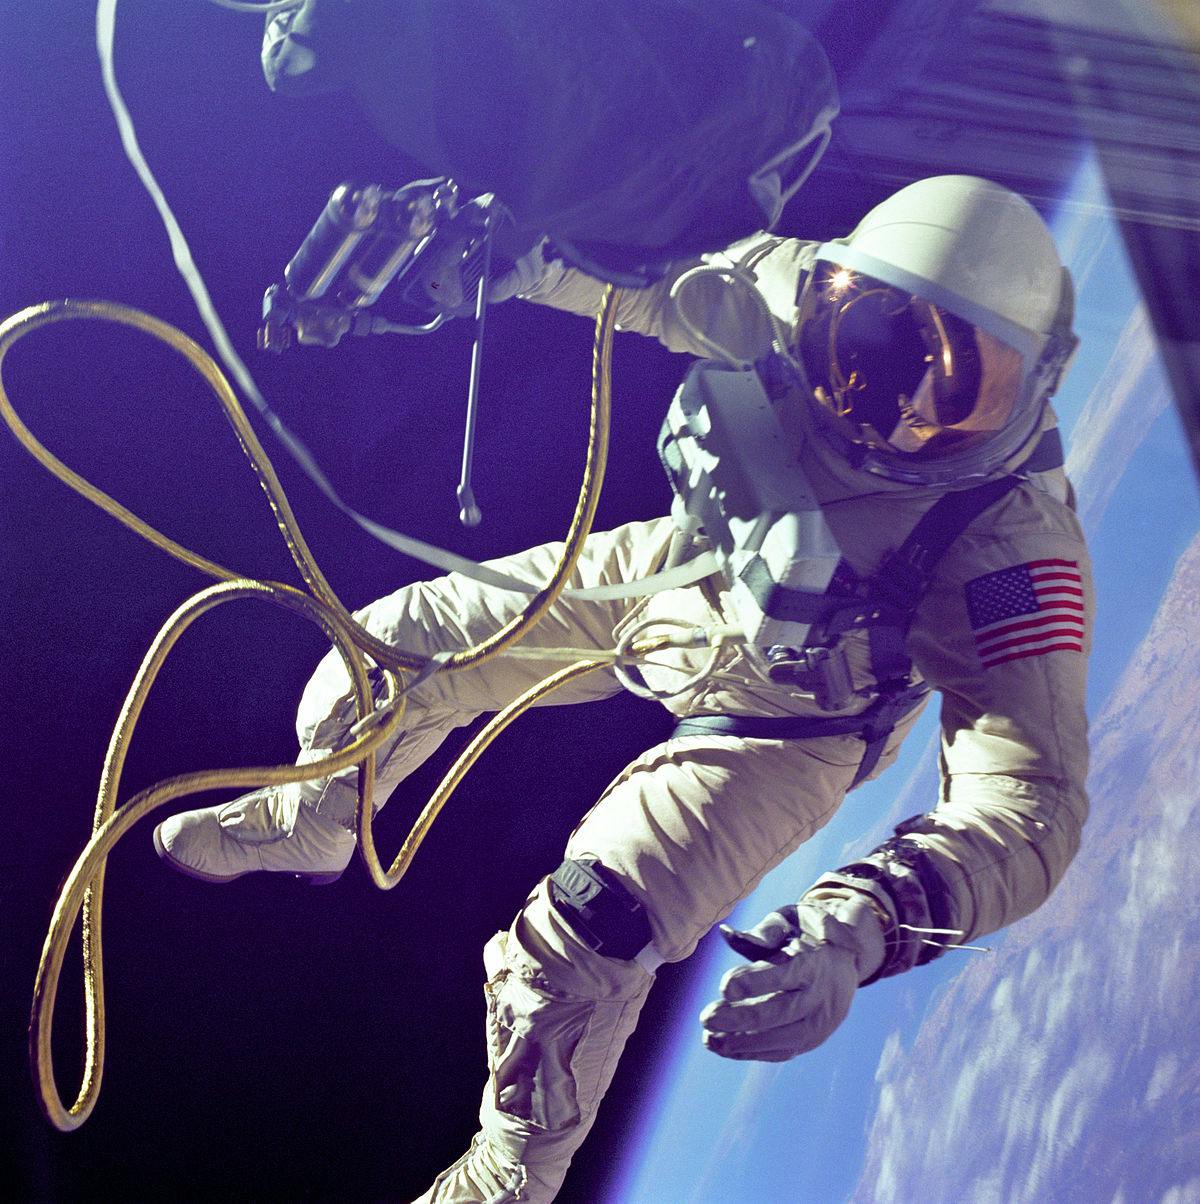 Astronaut floating in space with connecting air hoses with earth in background